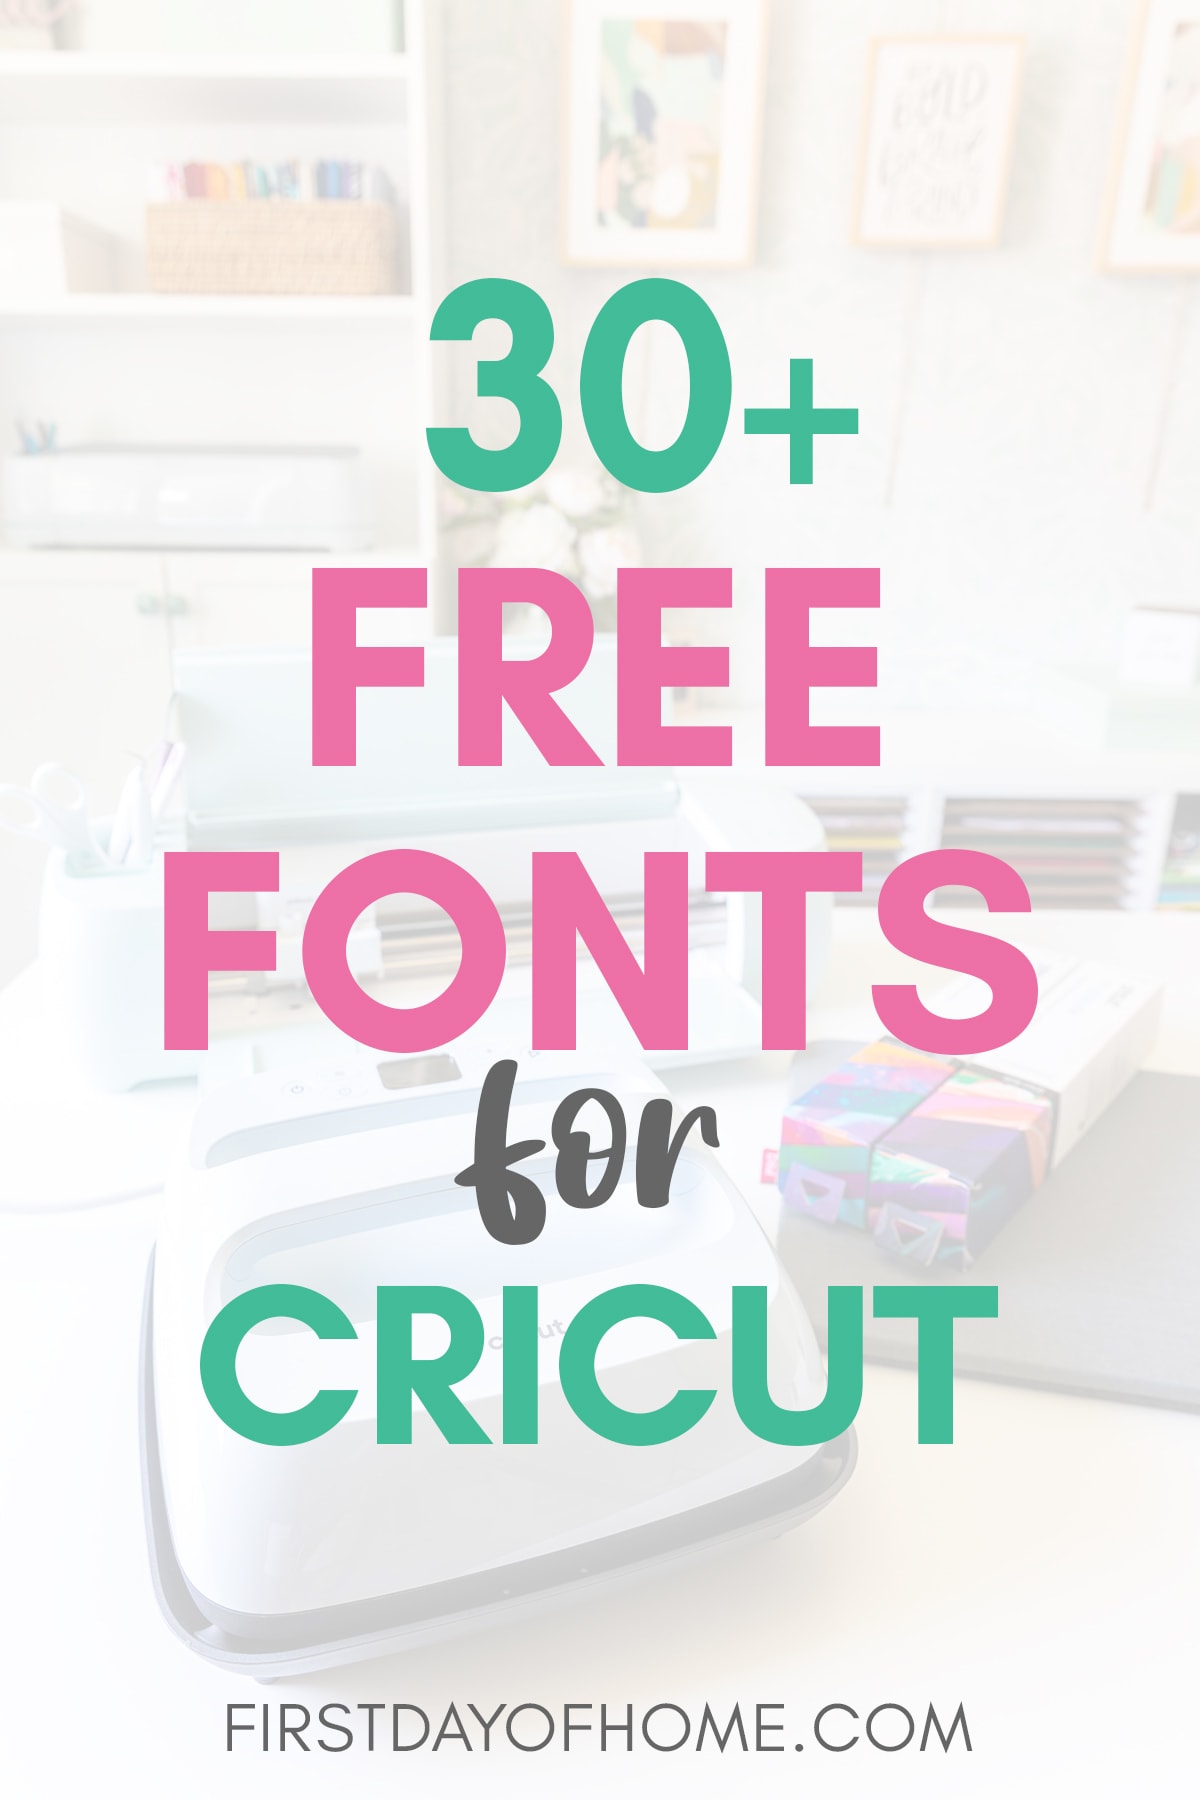 Image of Cricut machines and tools with text overlay that reads "30+ Free Fonts for Cricut"